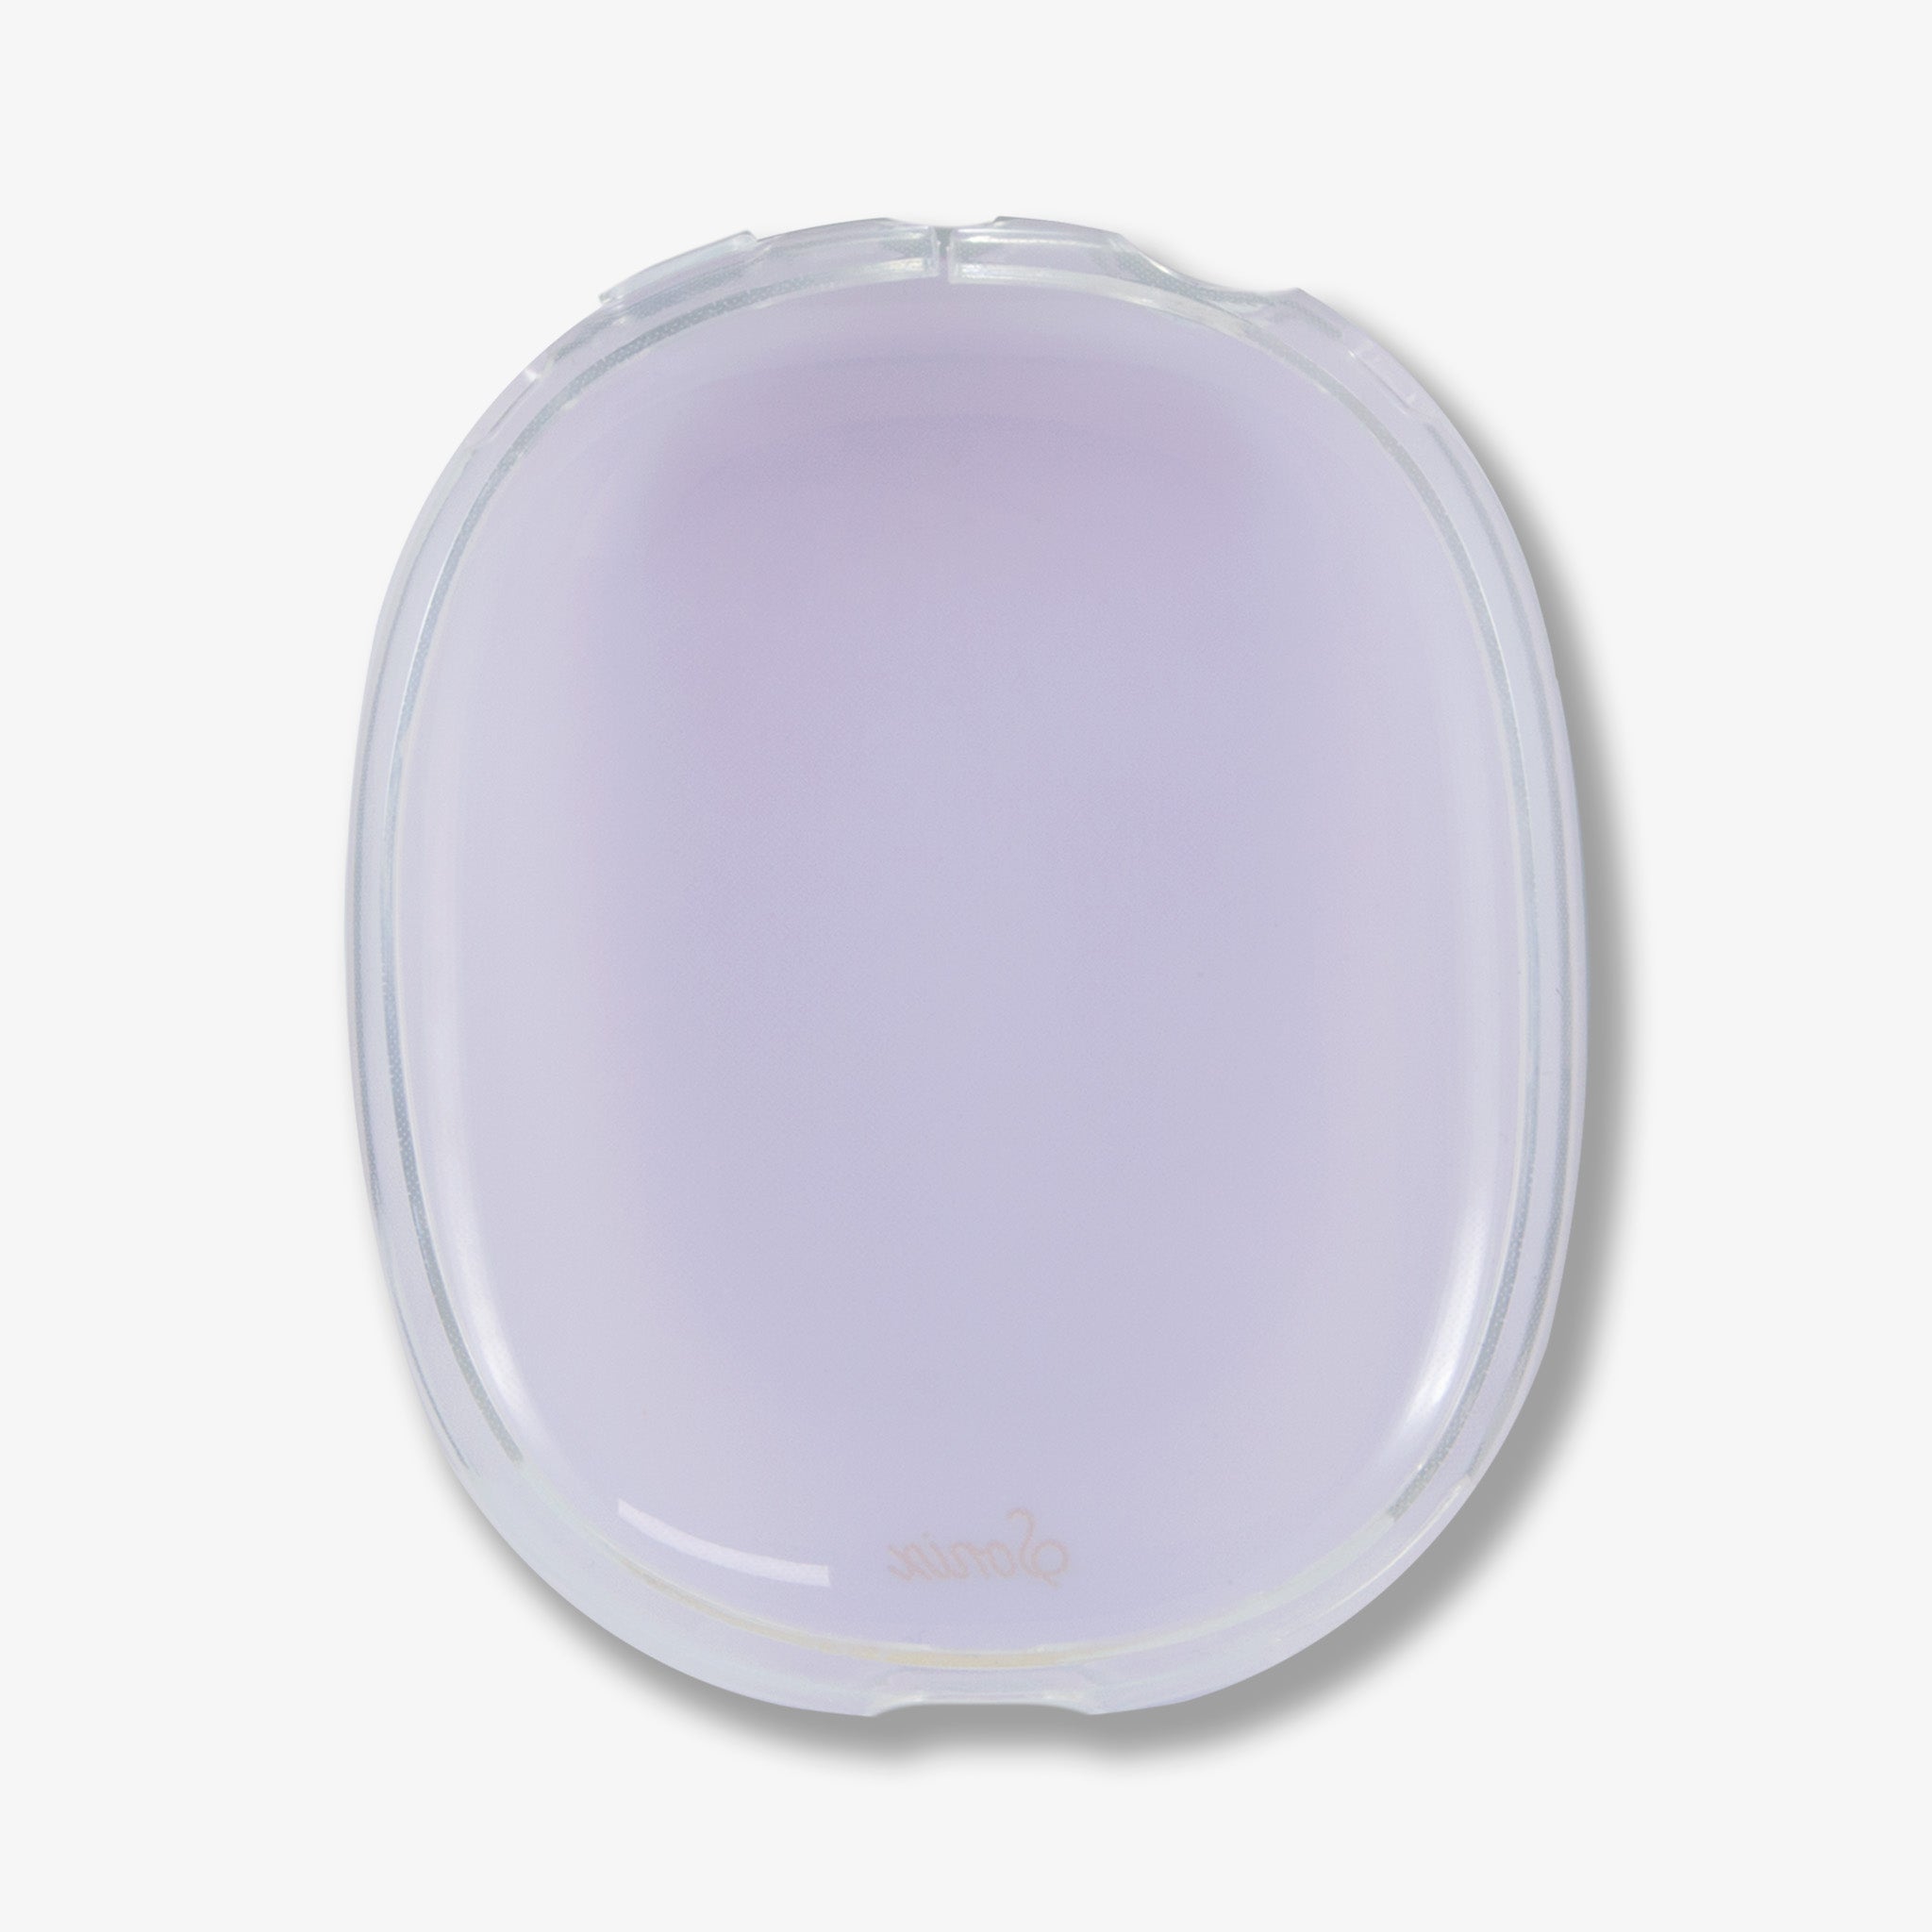 Jelly AirPods Max Cover - Lavender